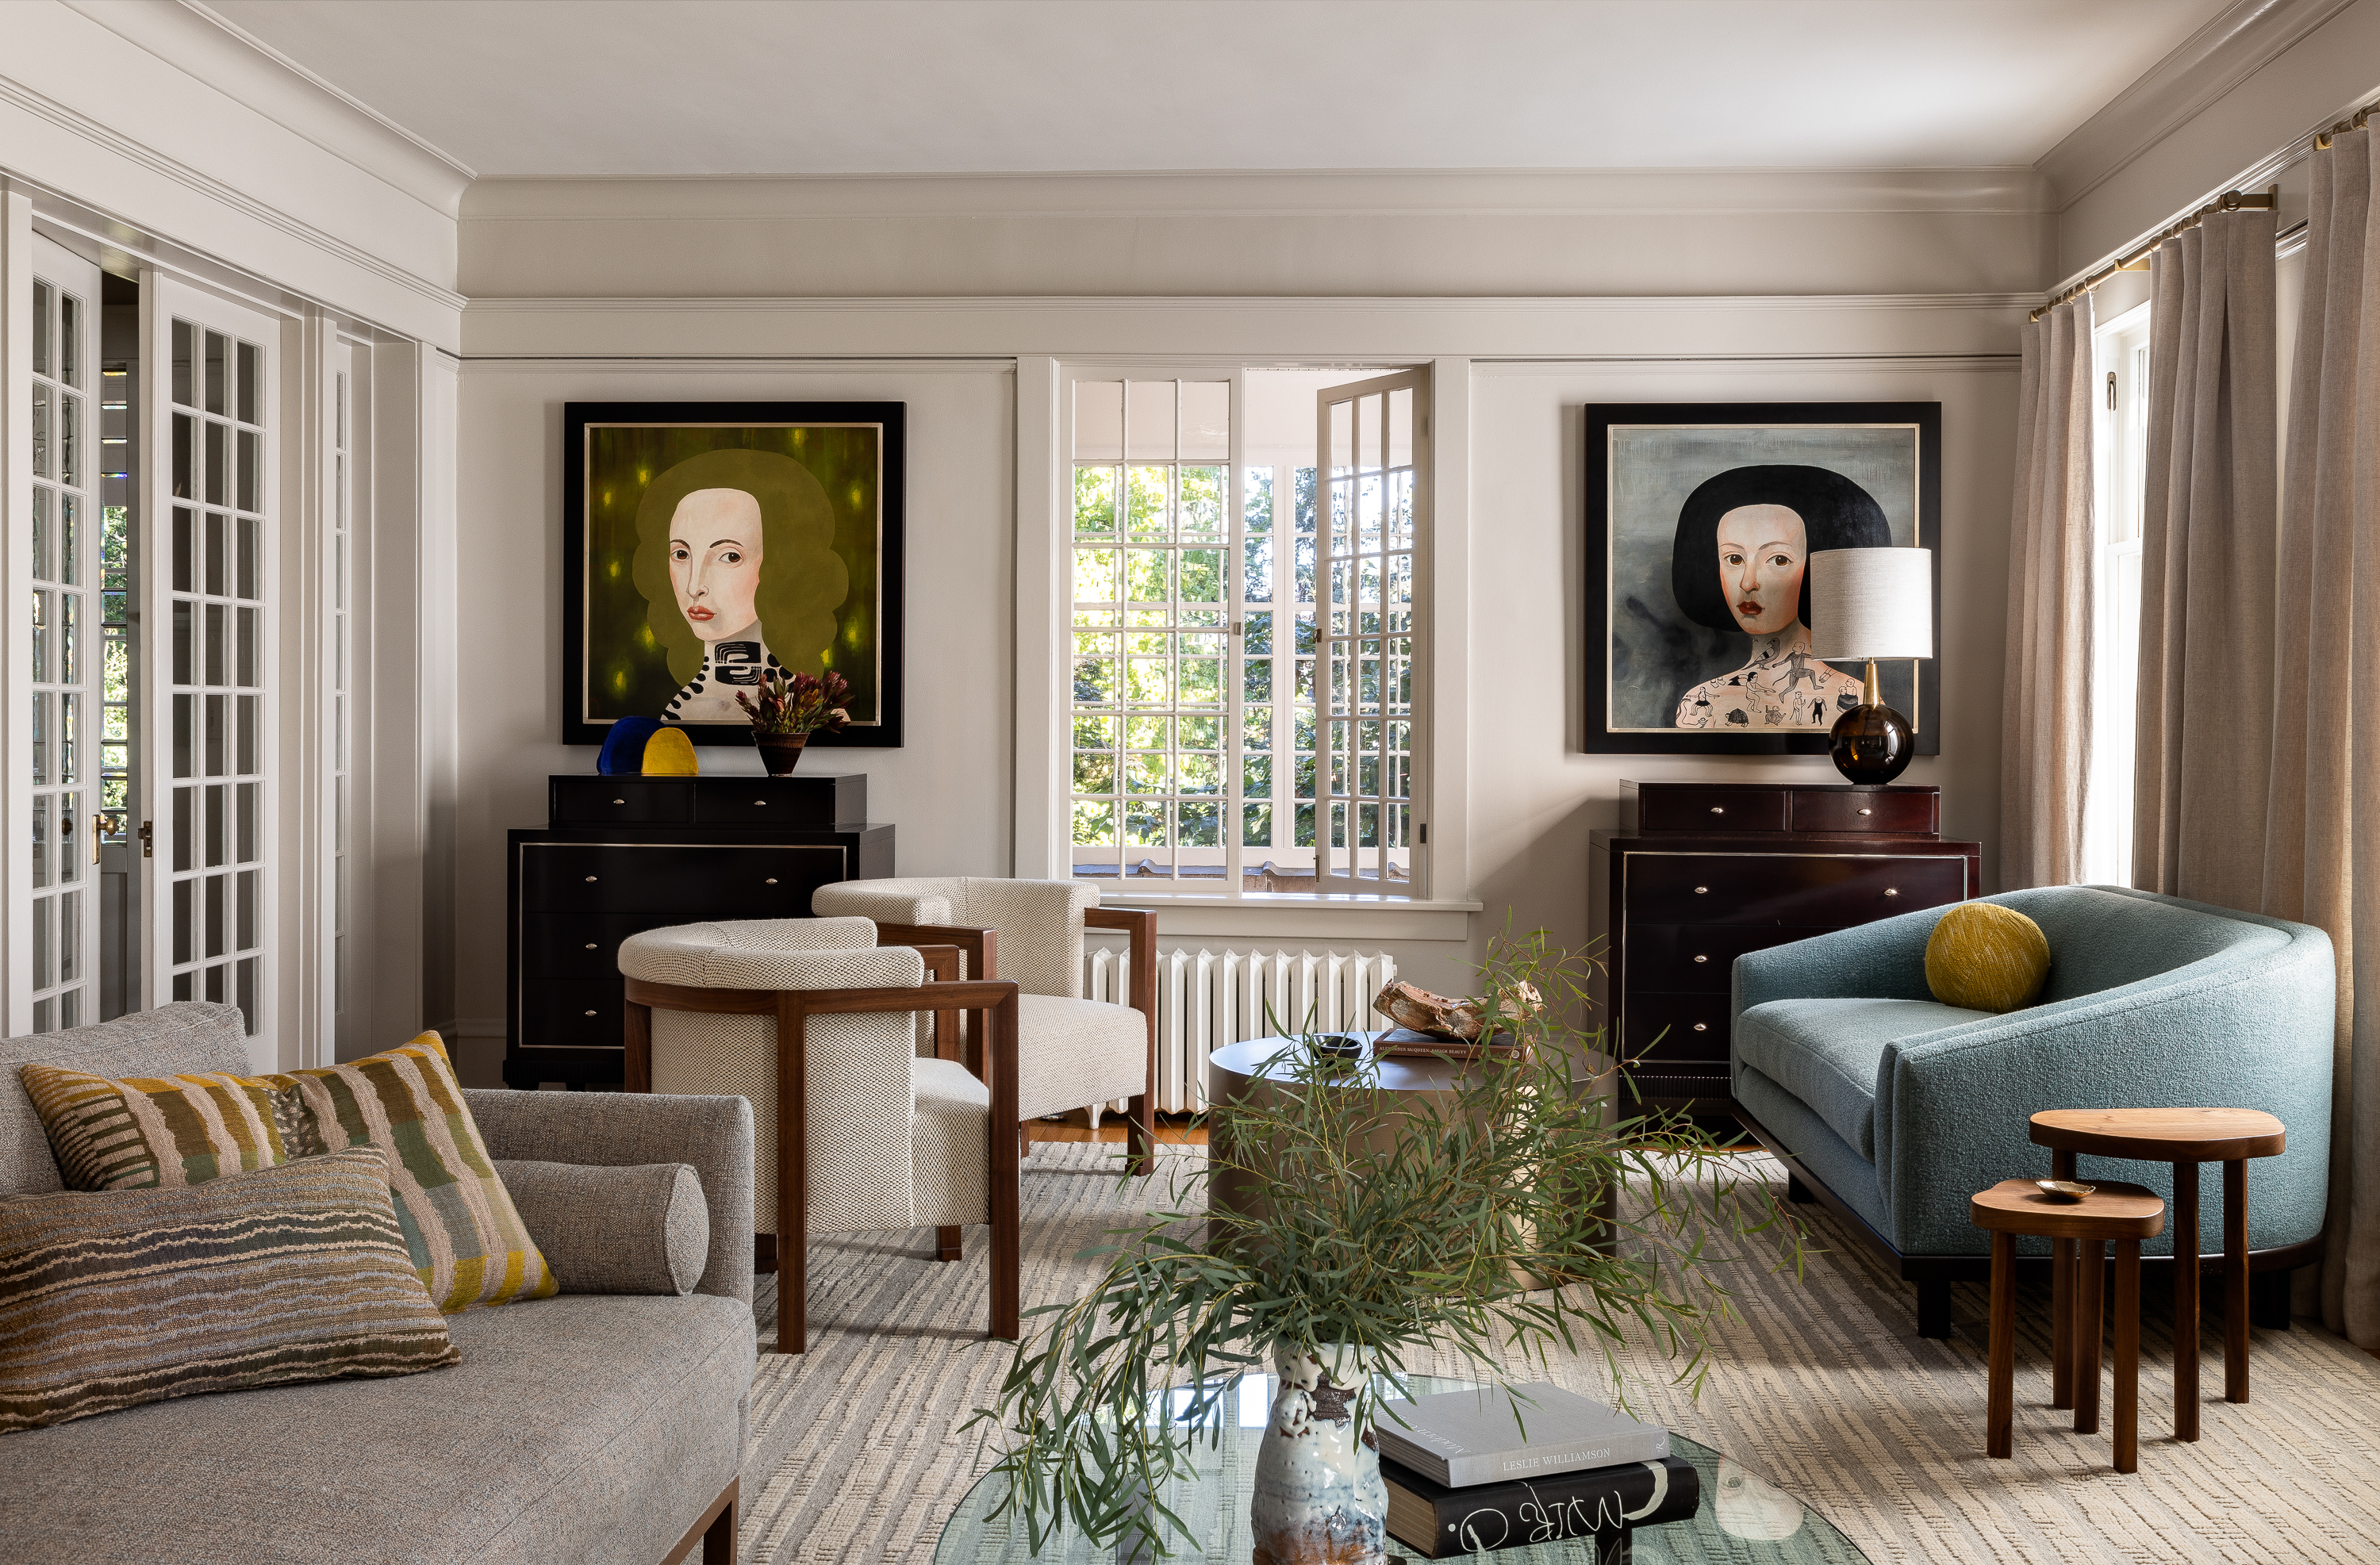 Living room hero shot featuring portrait oil paintings and furniture by Dmytri & Co, Tagore Chair, and a Custom Nickey Kehoe Curved Sofa.